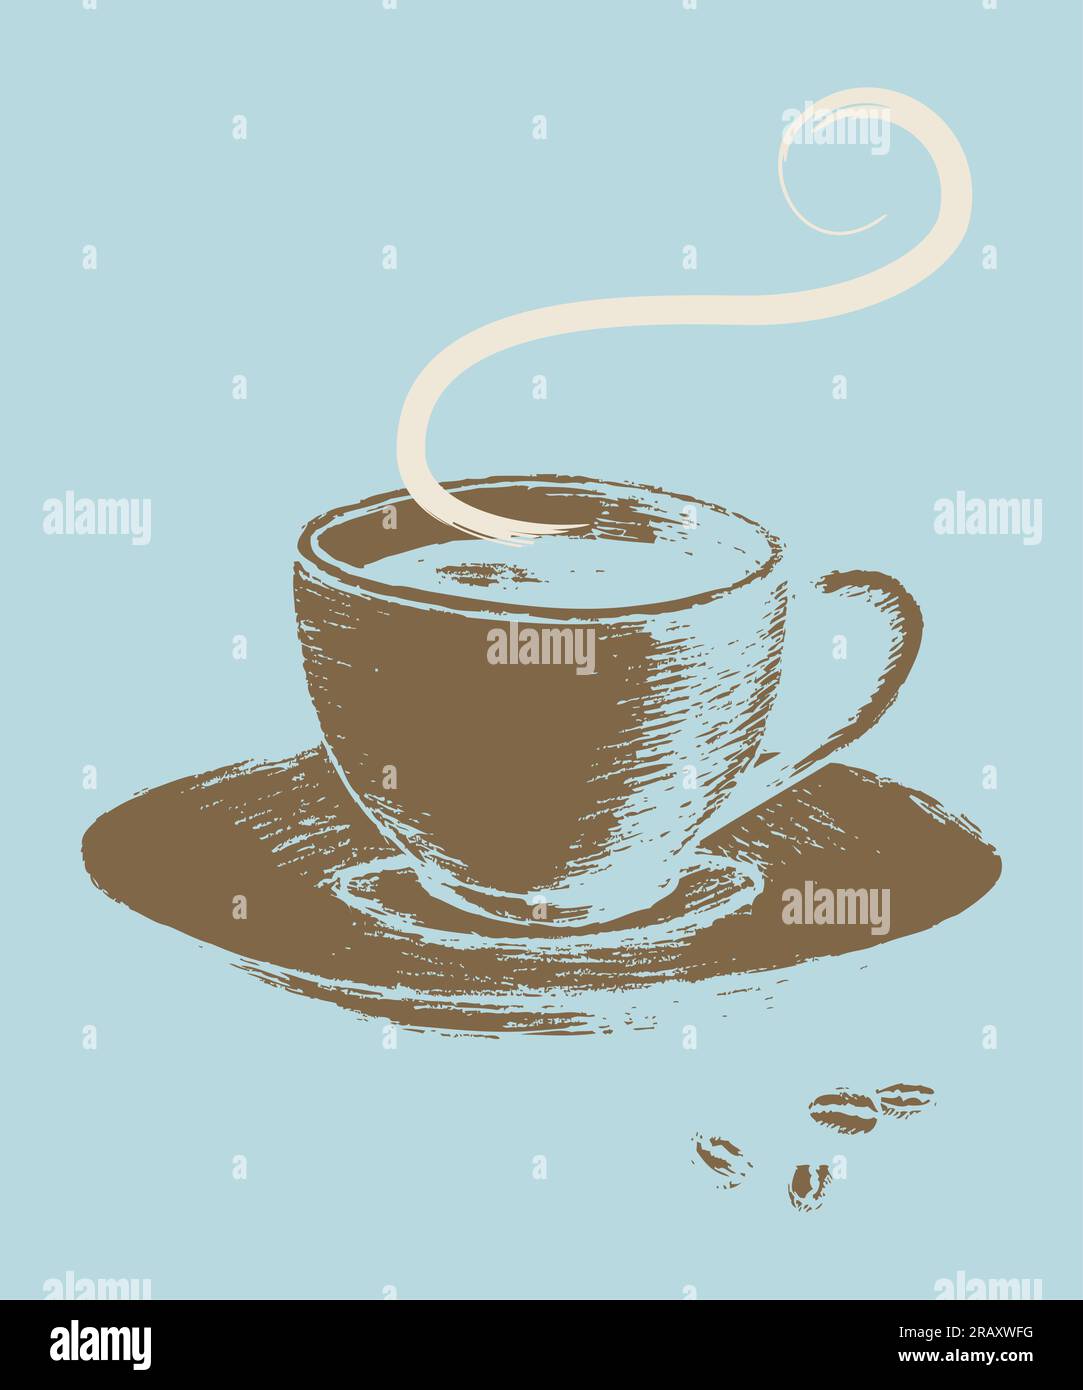 Retro art style illustration of cup of coffee Stock Vector